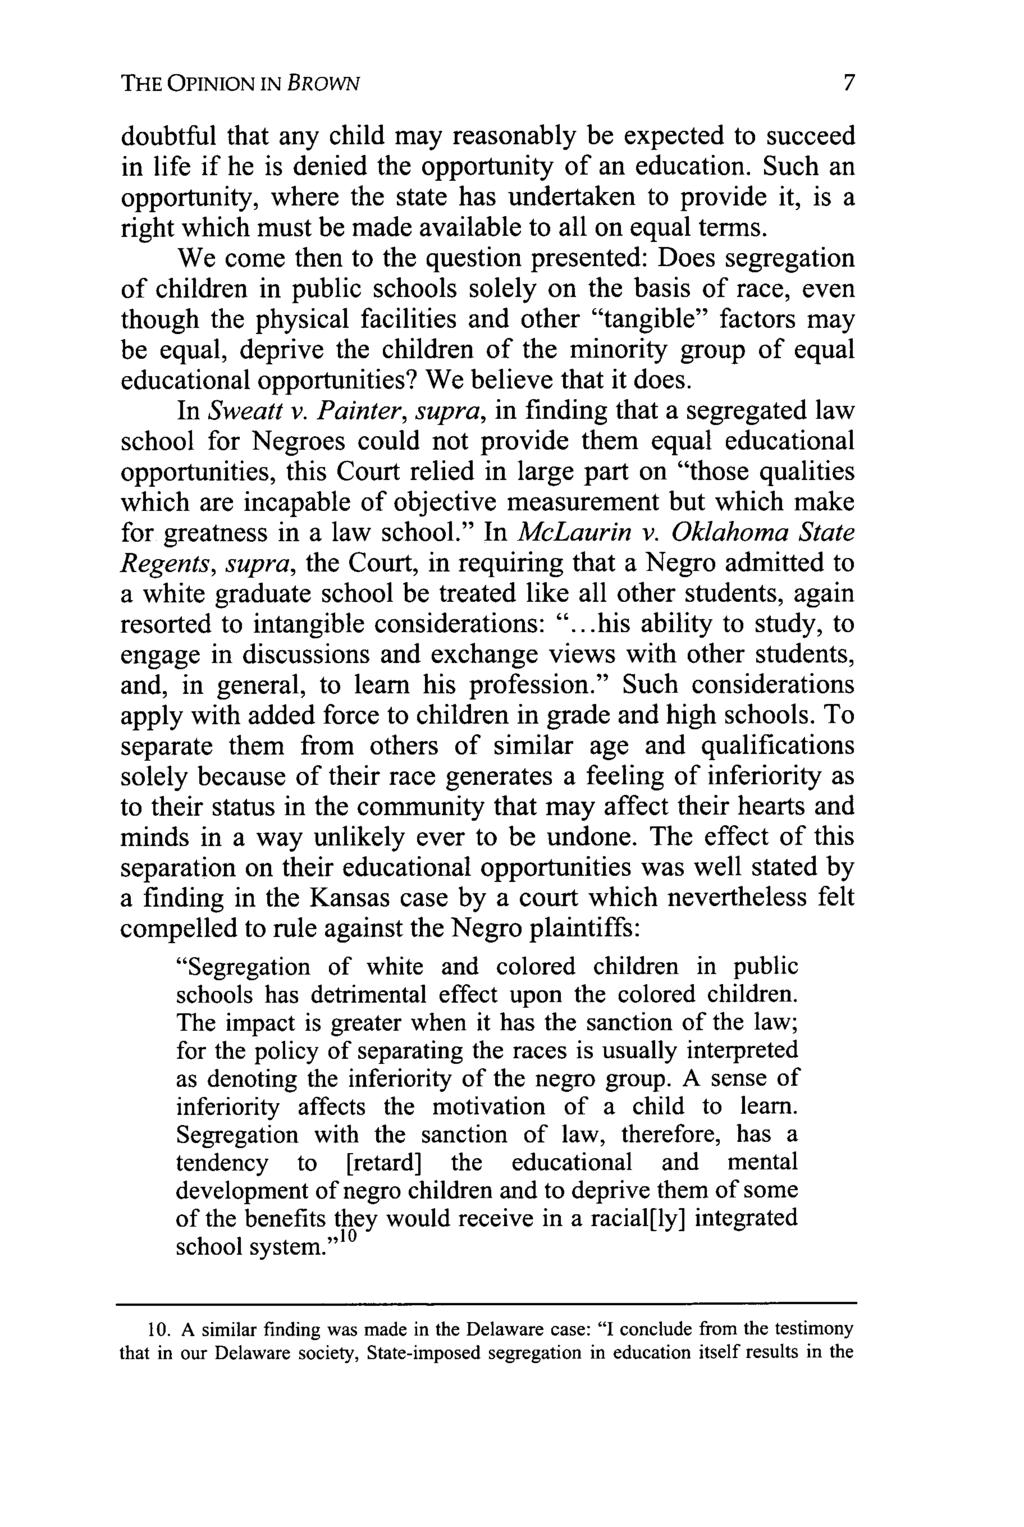 THE OPINION IN BROWN doubtful that any child may reasonably be expected to succeed in life if he is denied the opportunity of an education.